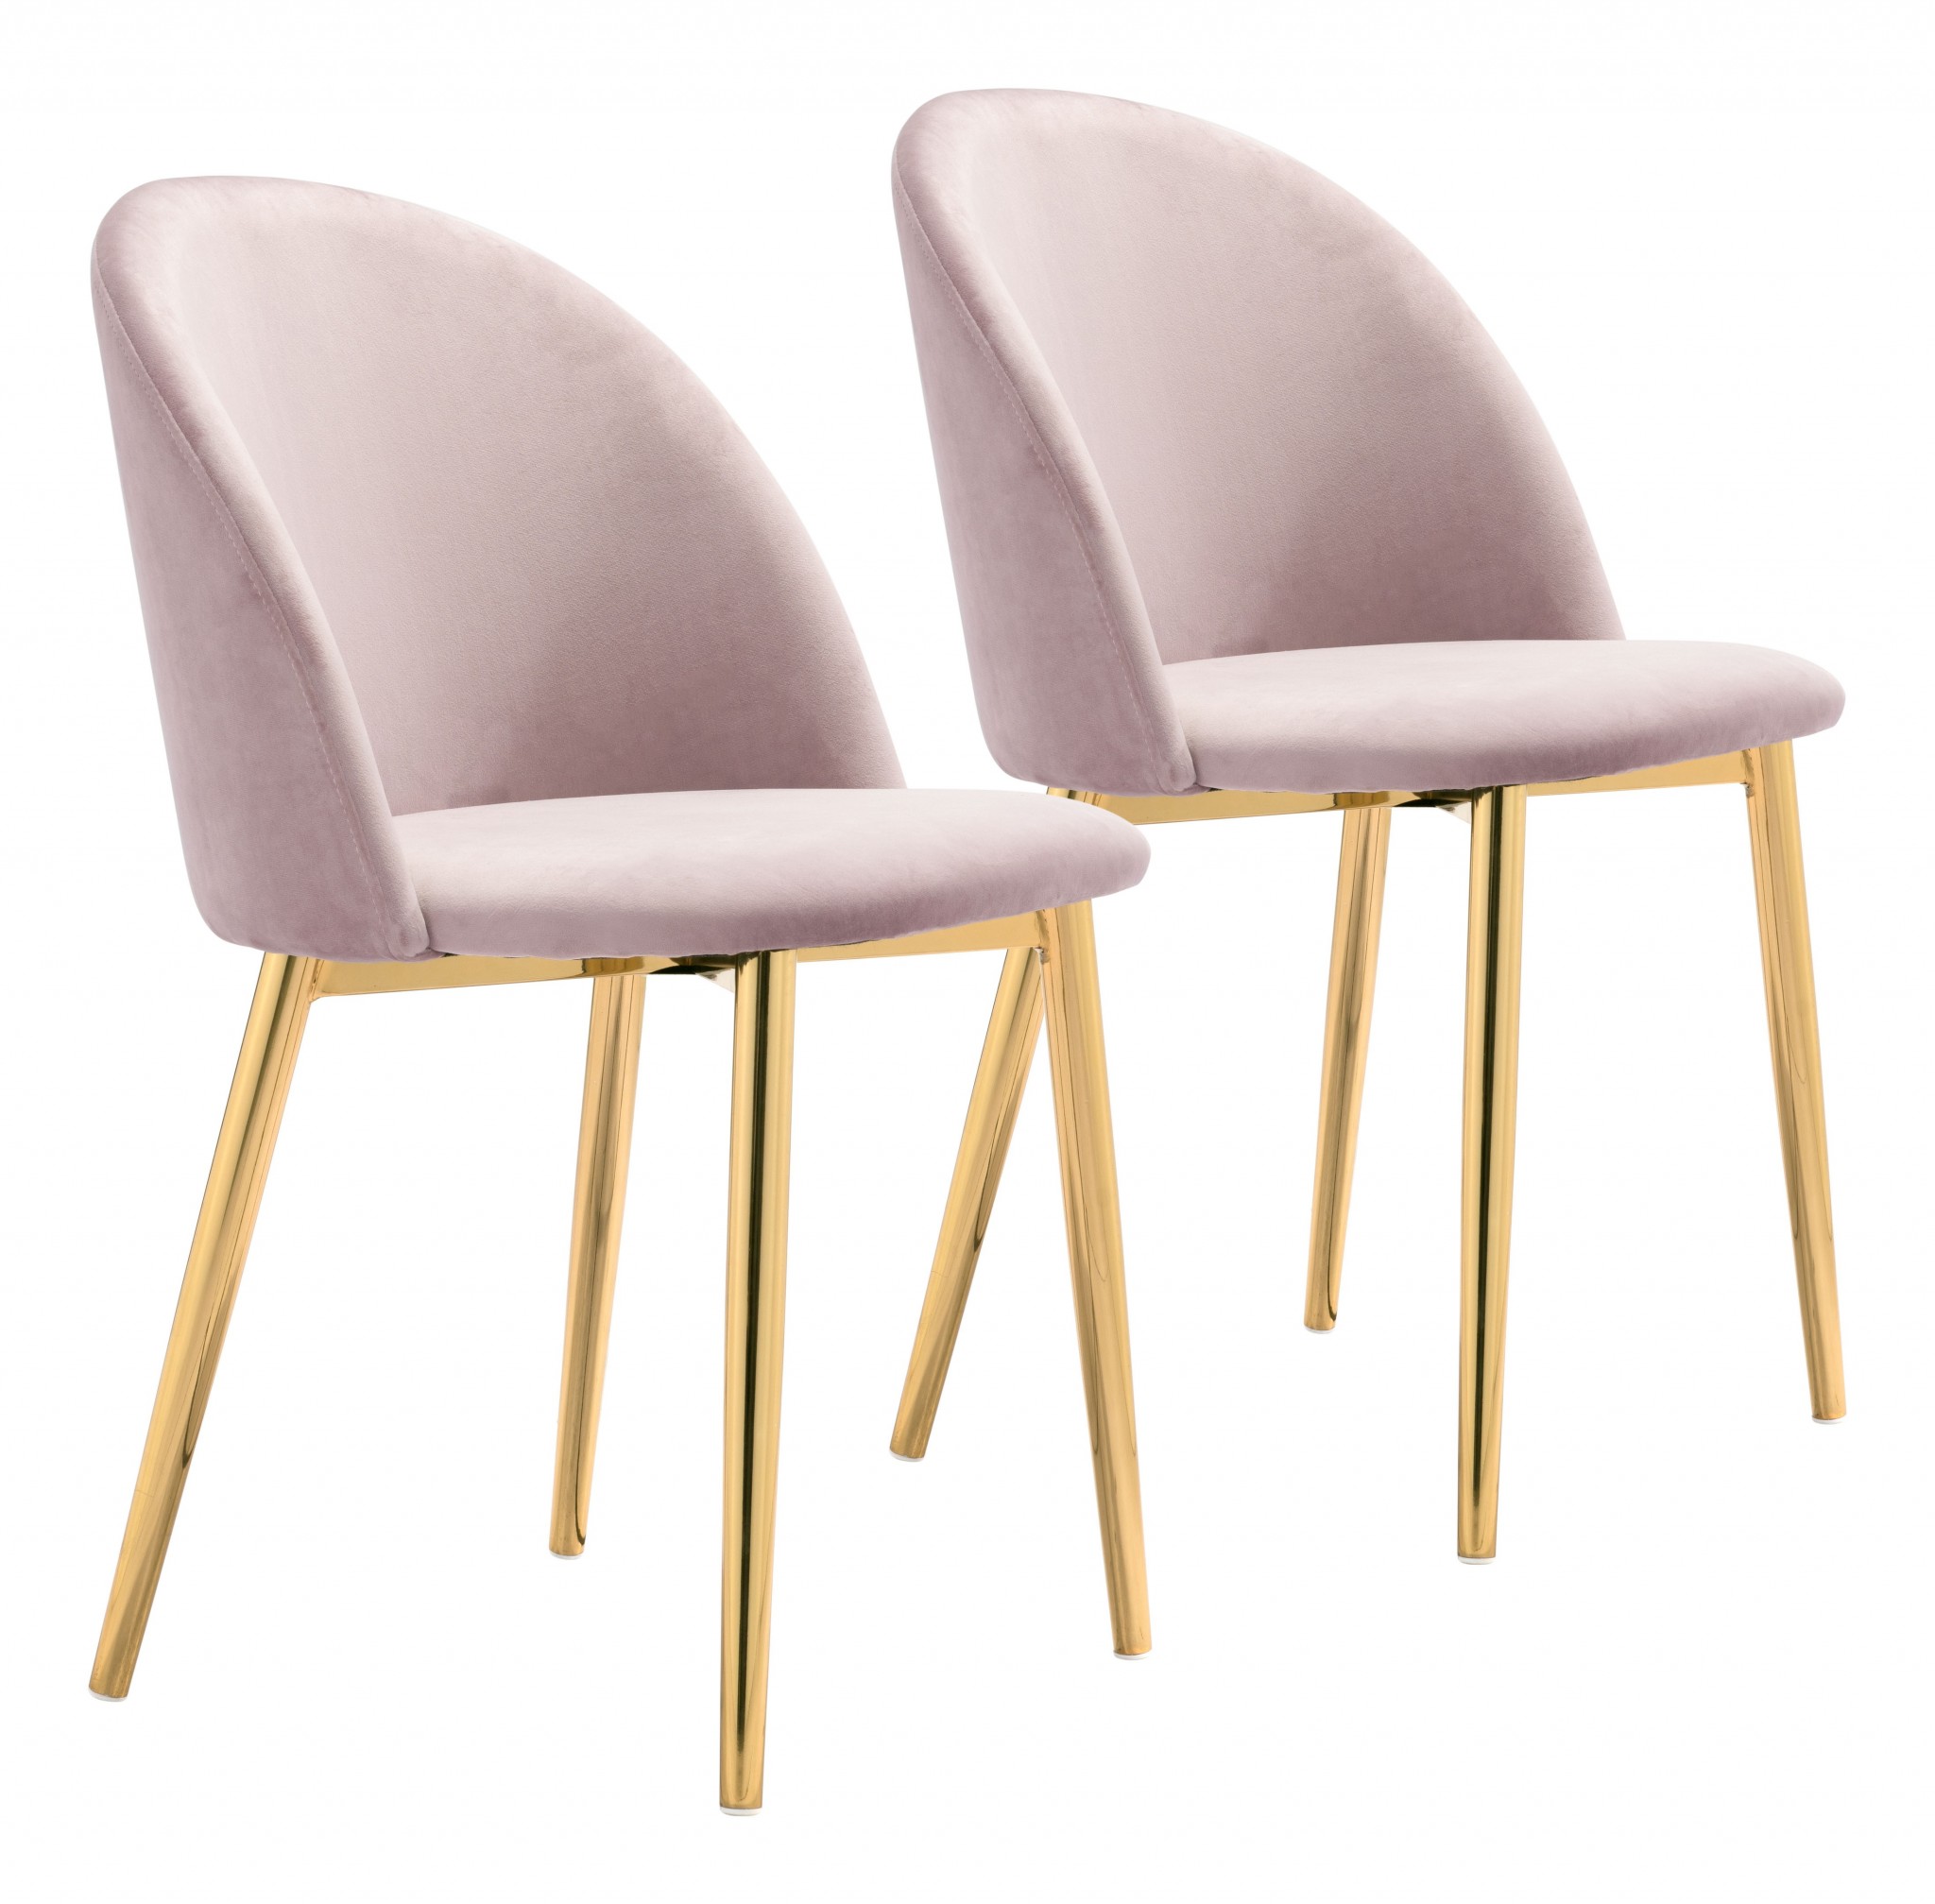 Set of Two Pale Pink and Gold Modern Pringle Dining Chairs